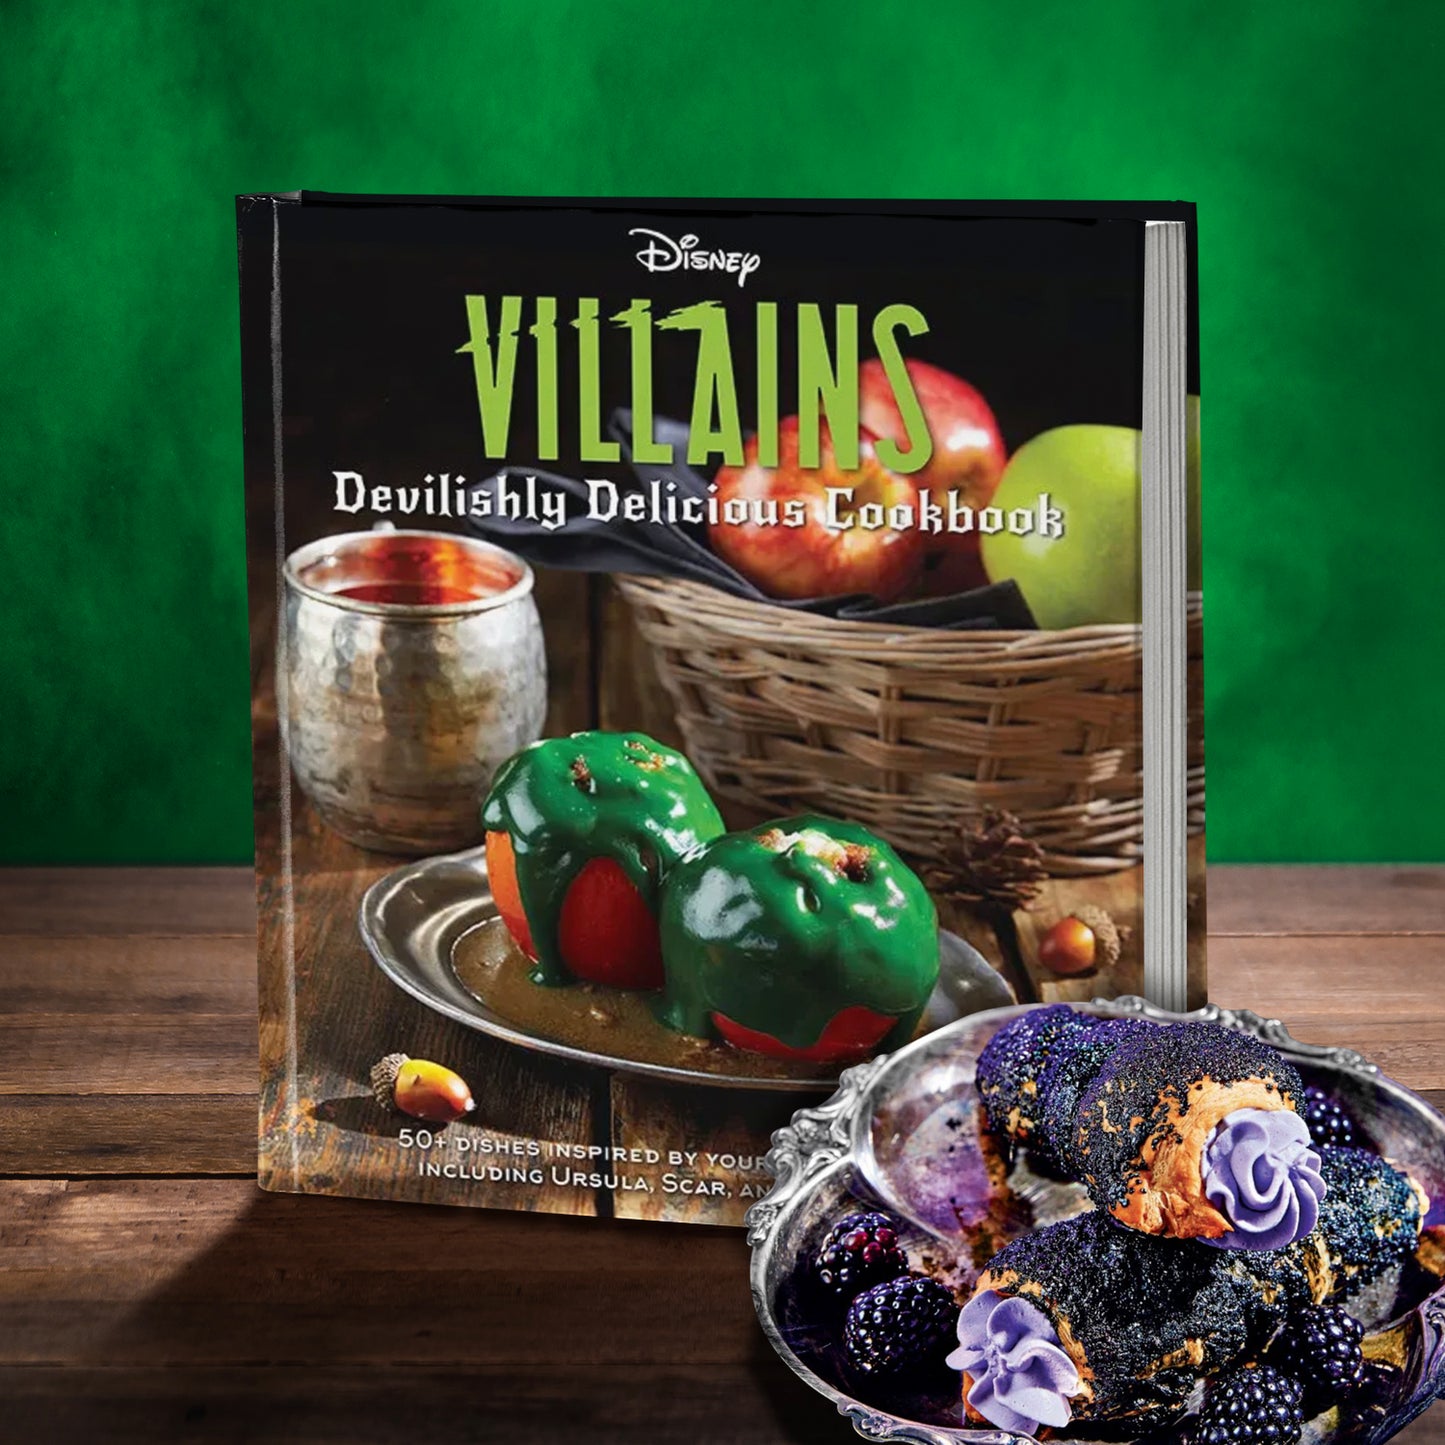 Load image into Gallery viewer, A book on a wood table, in front of a green background. On the book cover is white and green text saying &amp;quot;disney villains, devilishly delocious cookbook.&amp;quot; Below the text are apples covered in green ooze, on a metal plate. Behind them is a basket filled with fresh apples. Next to the basket is a metal mug. At the bottom is white text saying &amp;quot;50 plus dishes inspired by your favorite villains, including ursuala, scar, and cruella de vil.&amp;quot; Beside the book is a shell filled with flowers and dark berries.
